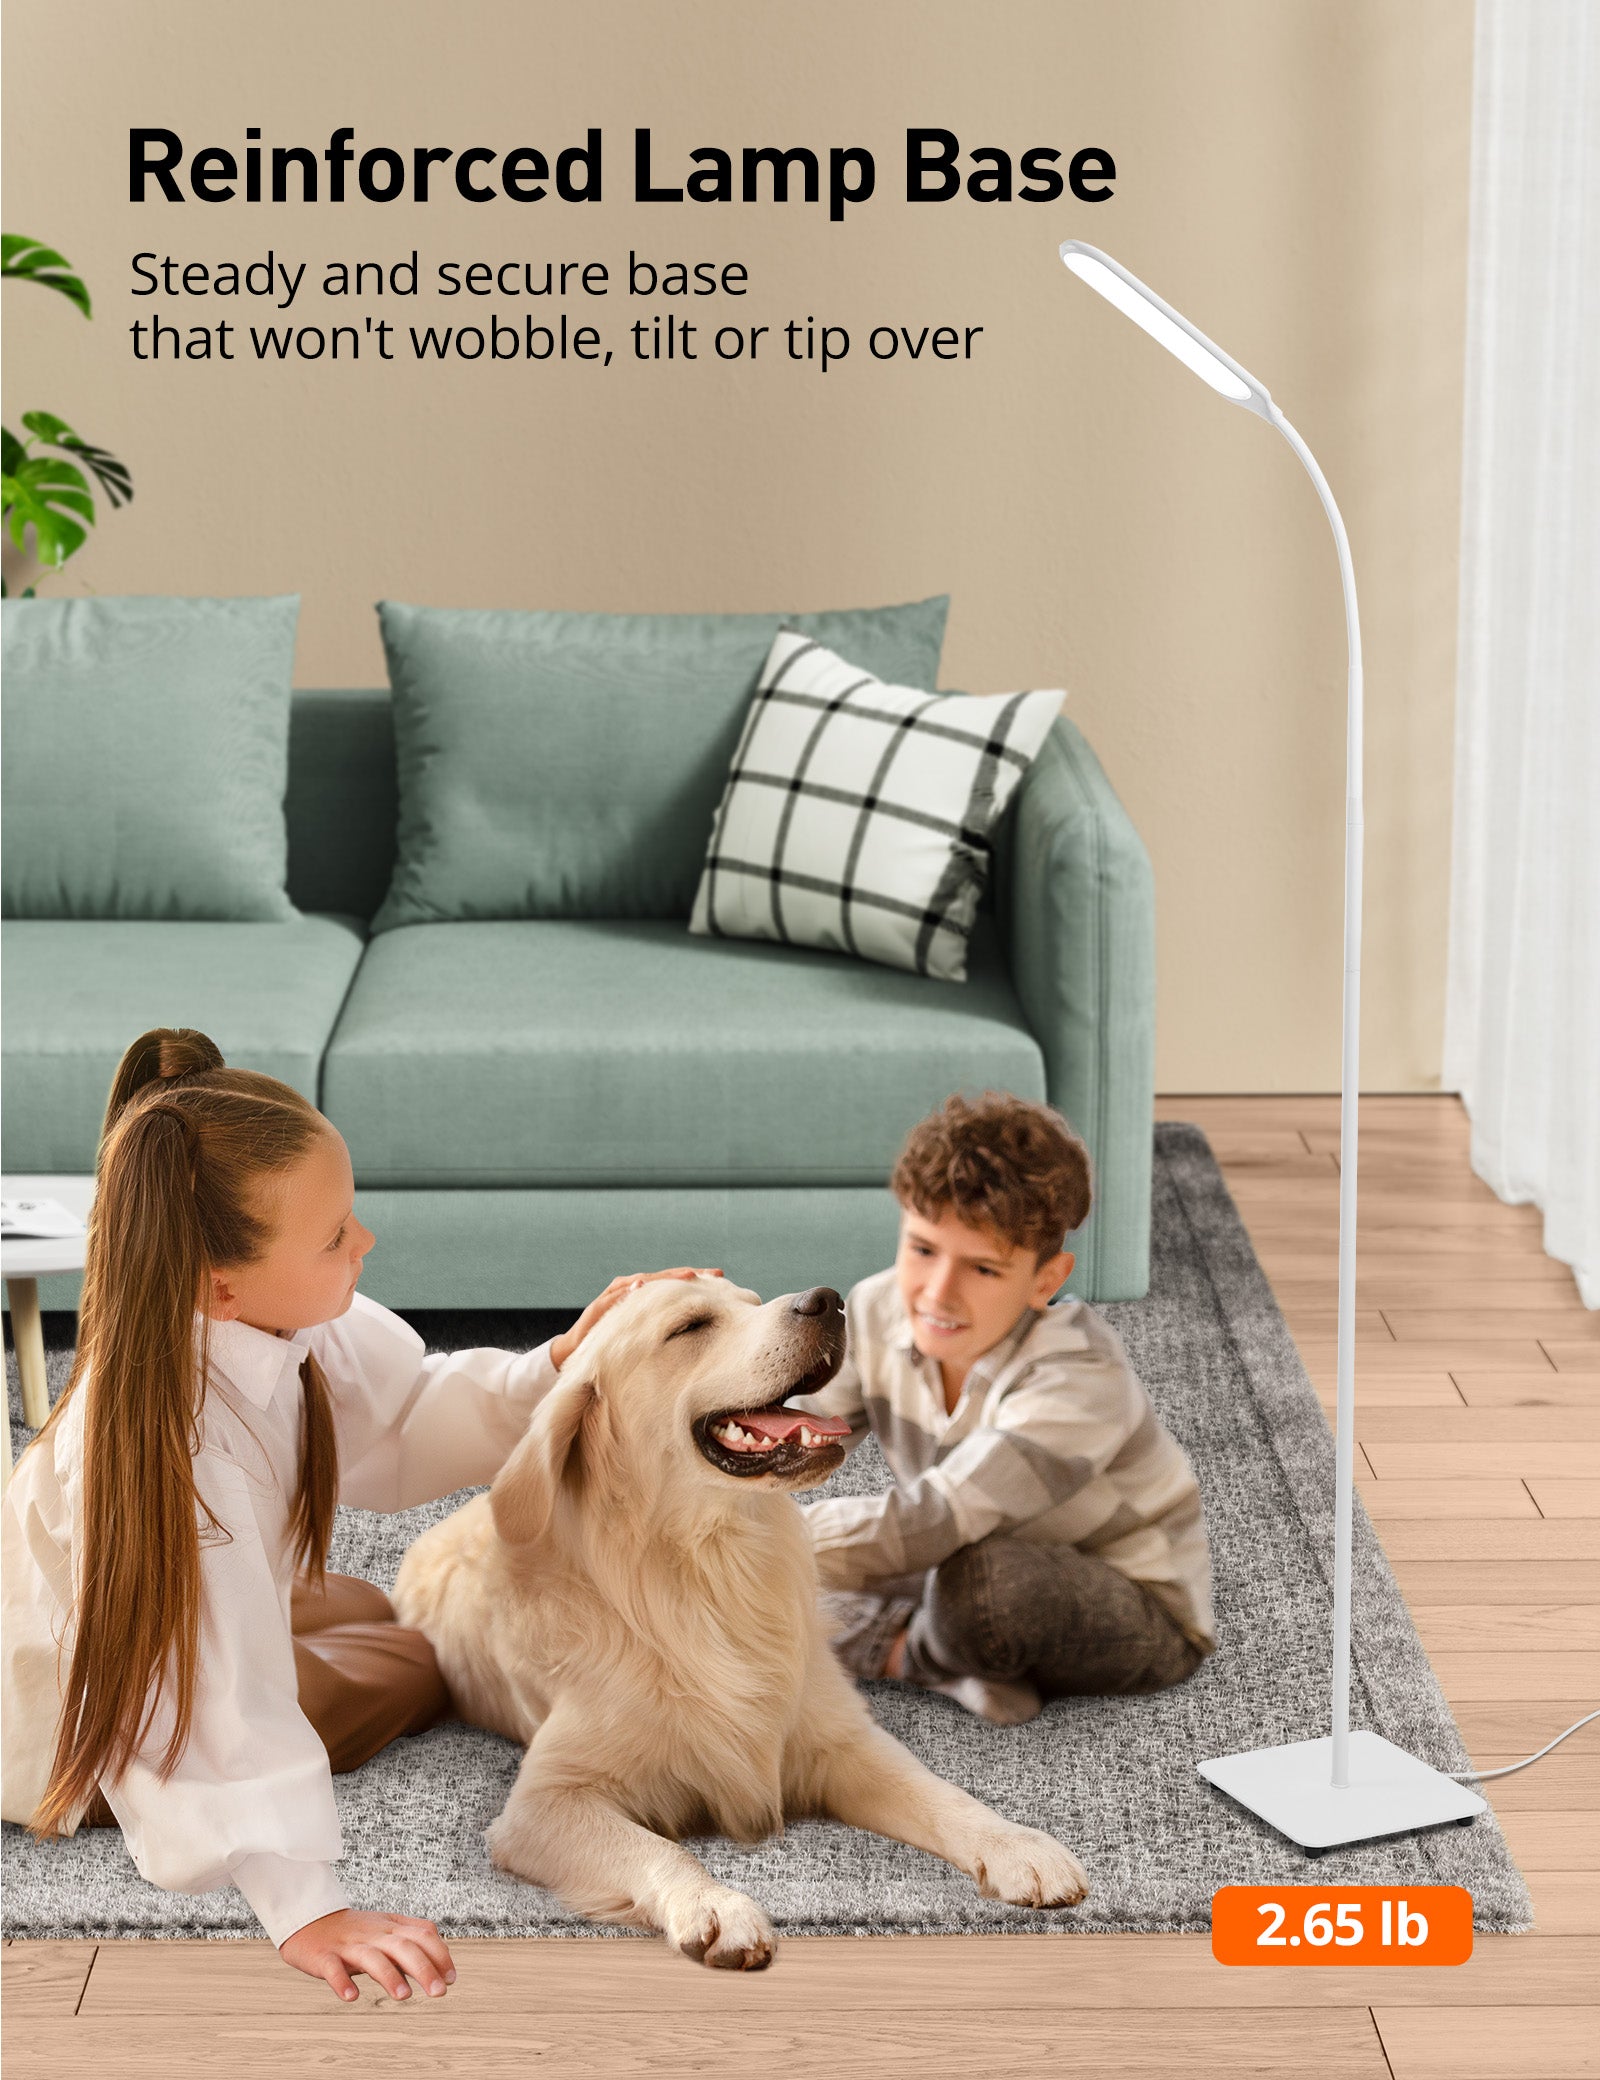 LED Floor Lamp, Super Bright Dimmable LED Lamps for Living Room, Standing Lamp with Adjustable Gooseneck, Touch Control, Stable Base DL023